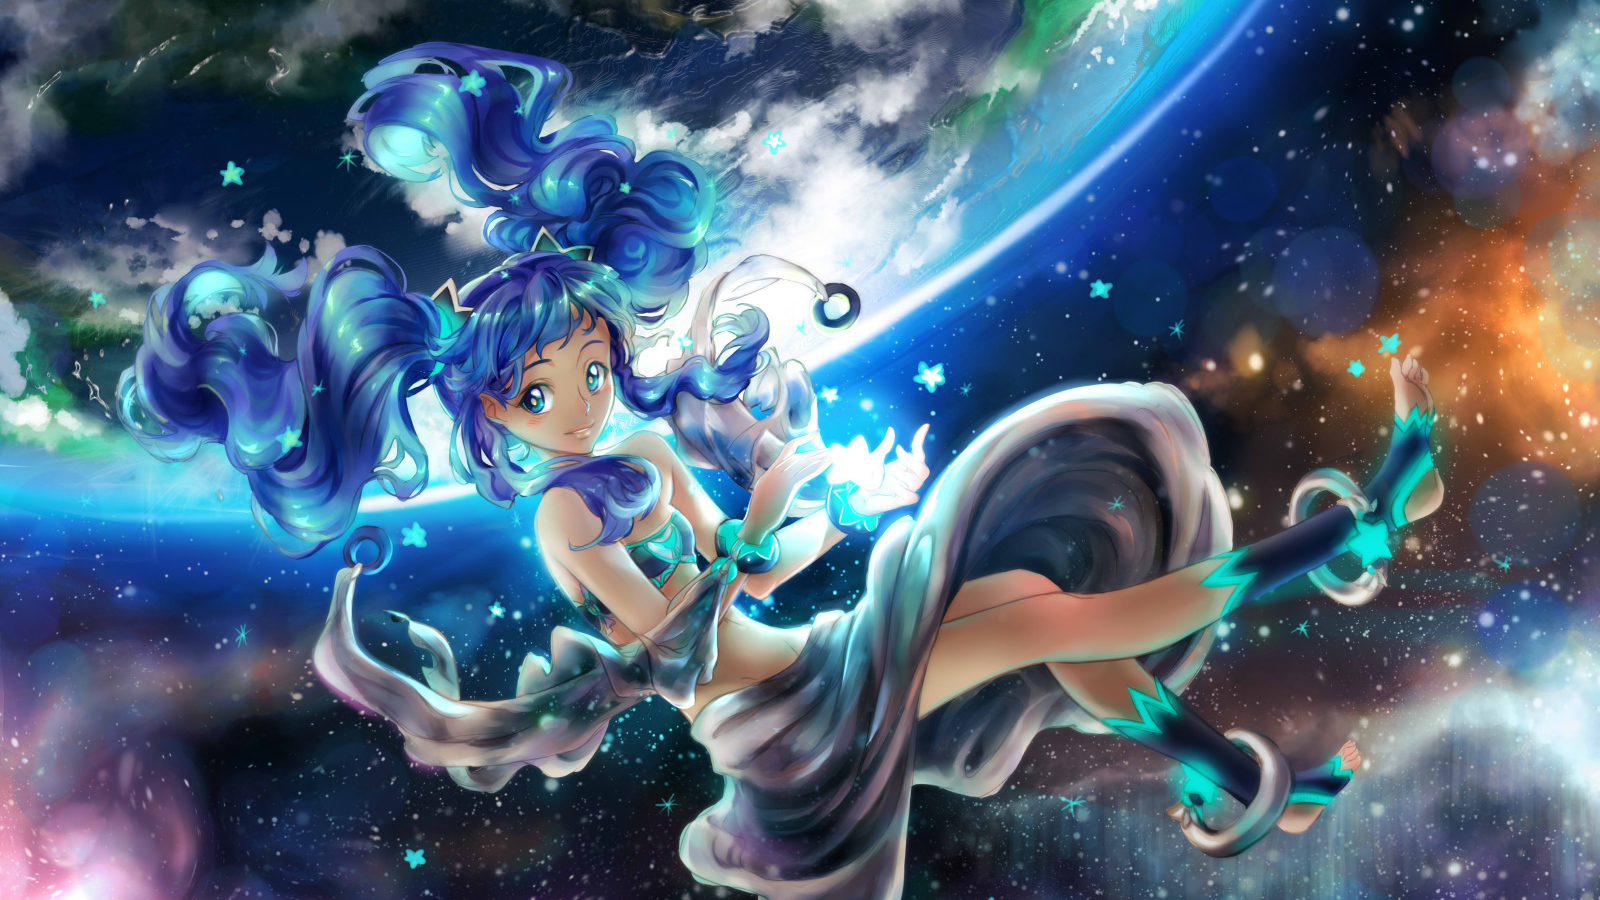 Anime girl with blue hair soars in the air